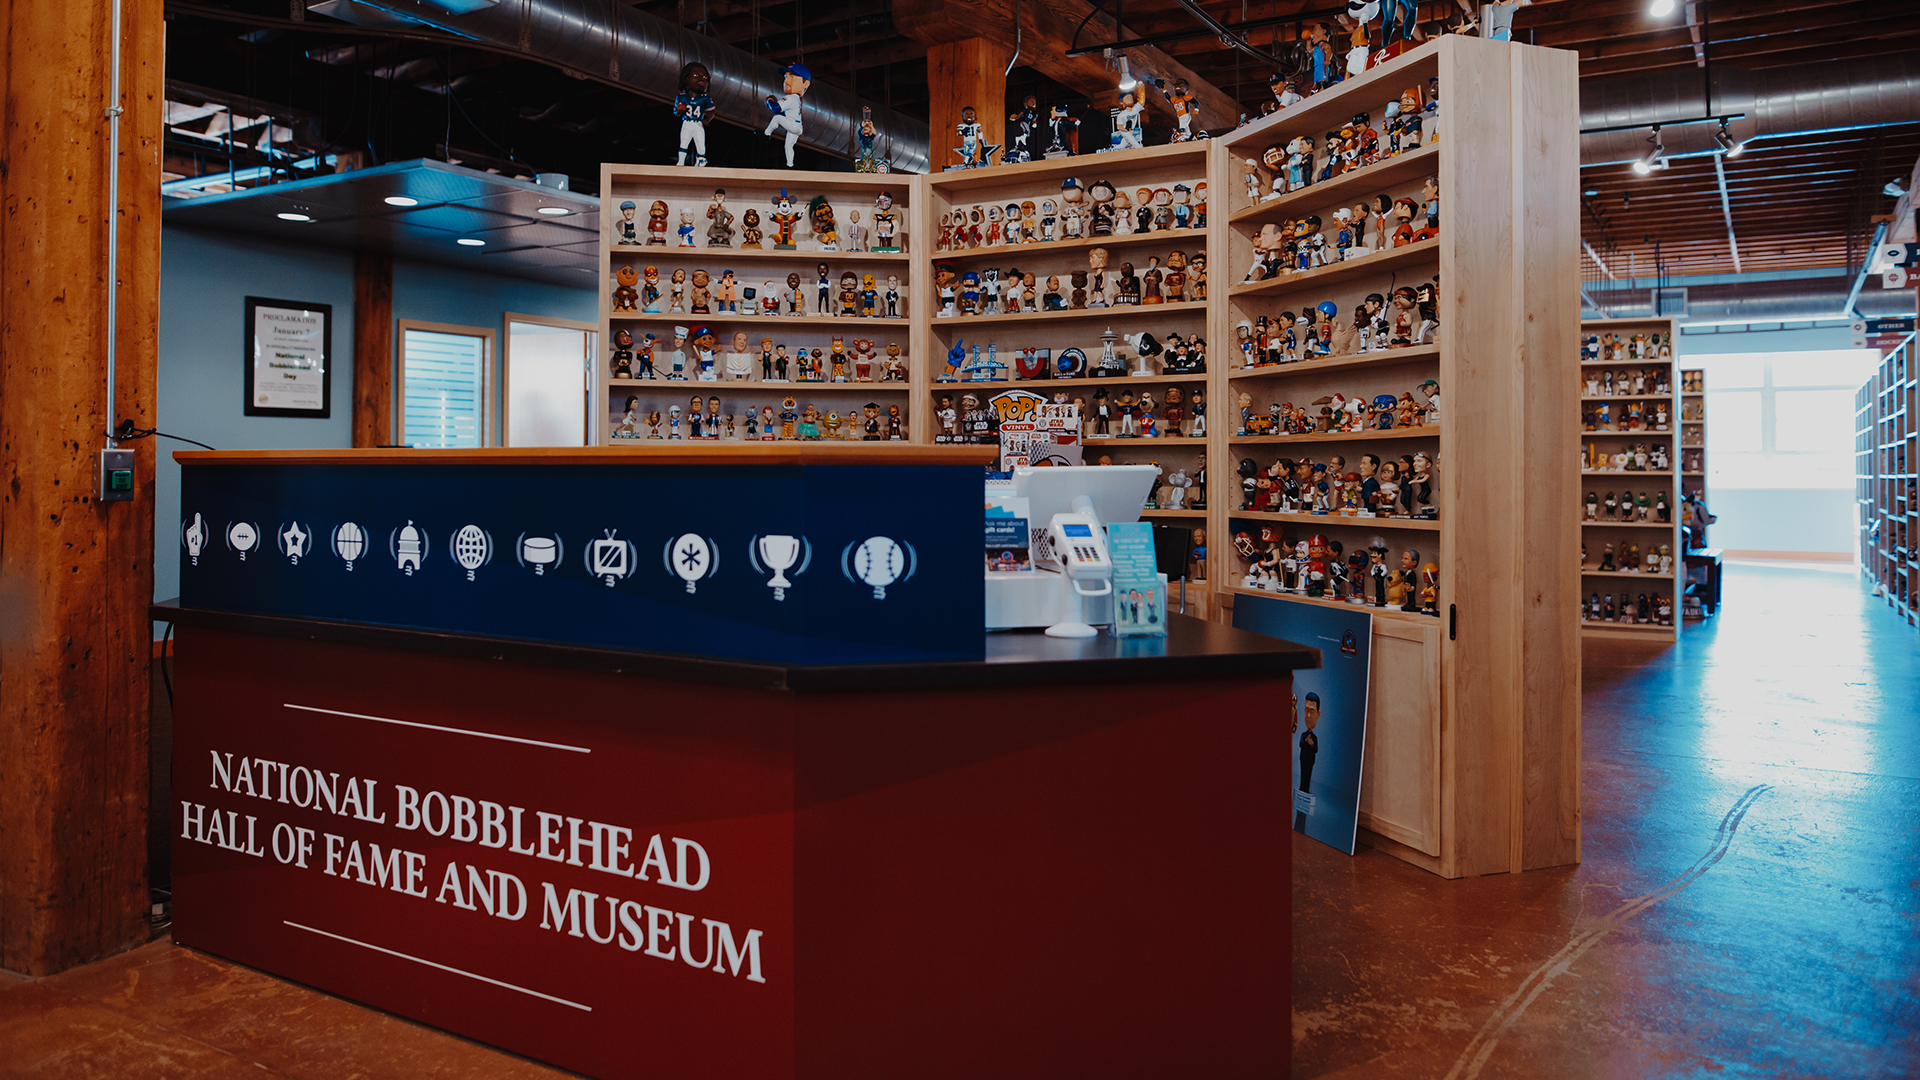 National Bobblehead Day  National Bobblehead Hall of Fame and Museum